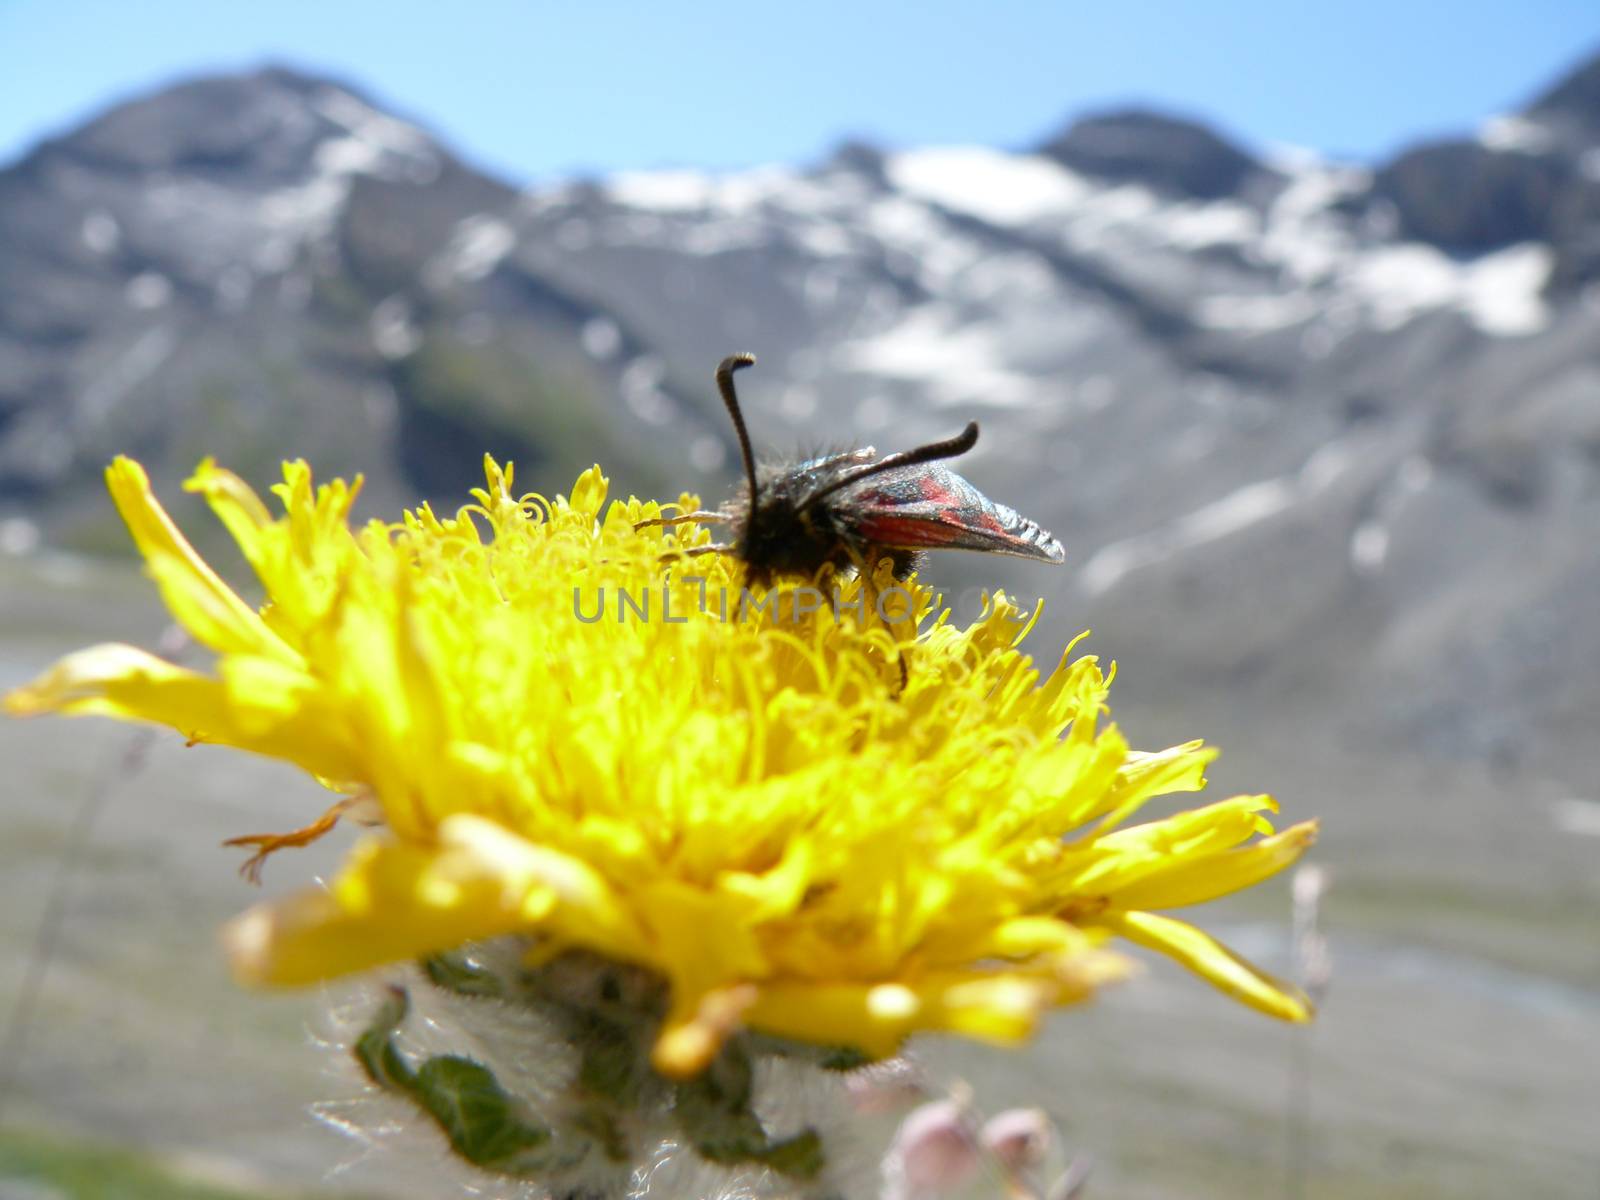 In the mountains above Leukerbad (Switzerland) the alpine flowers attract the many butterflies.